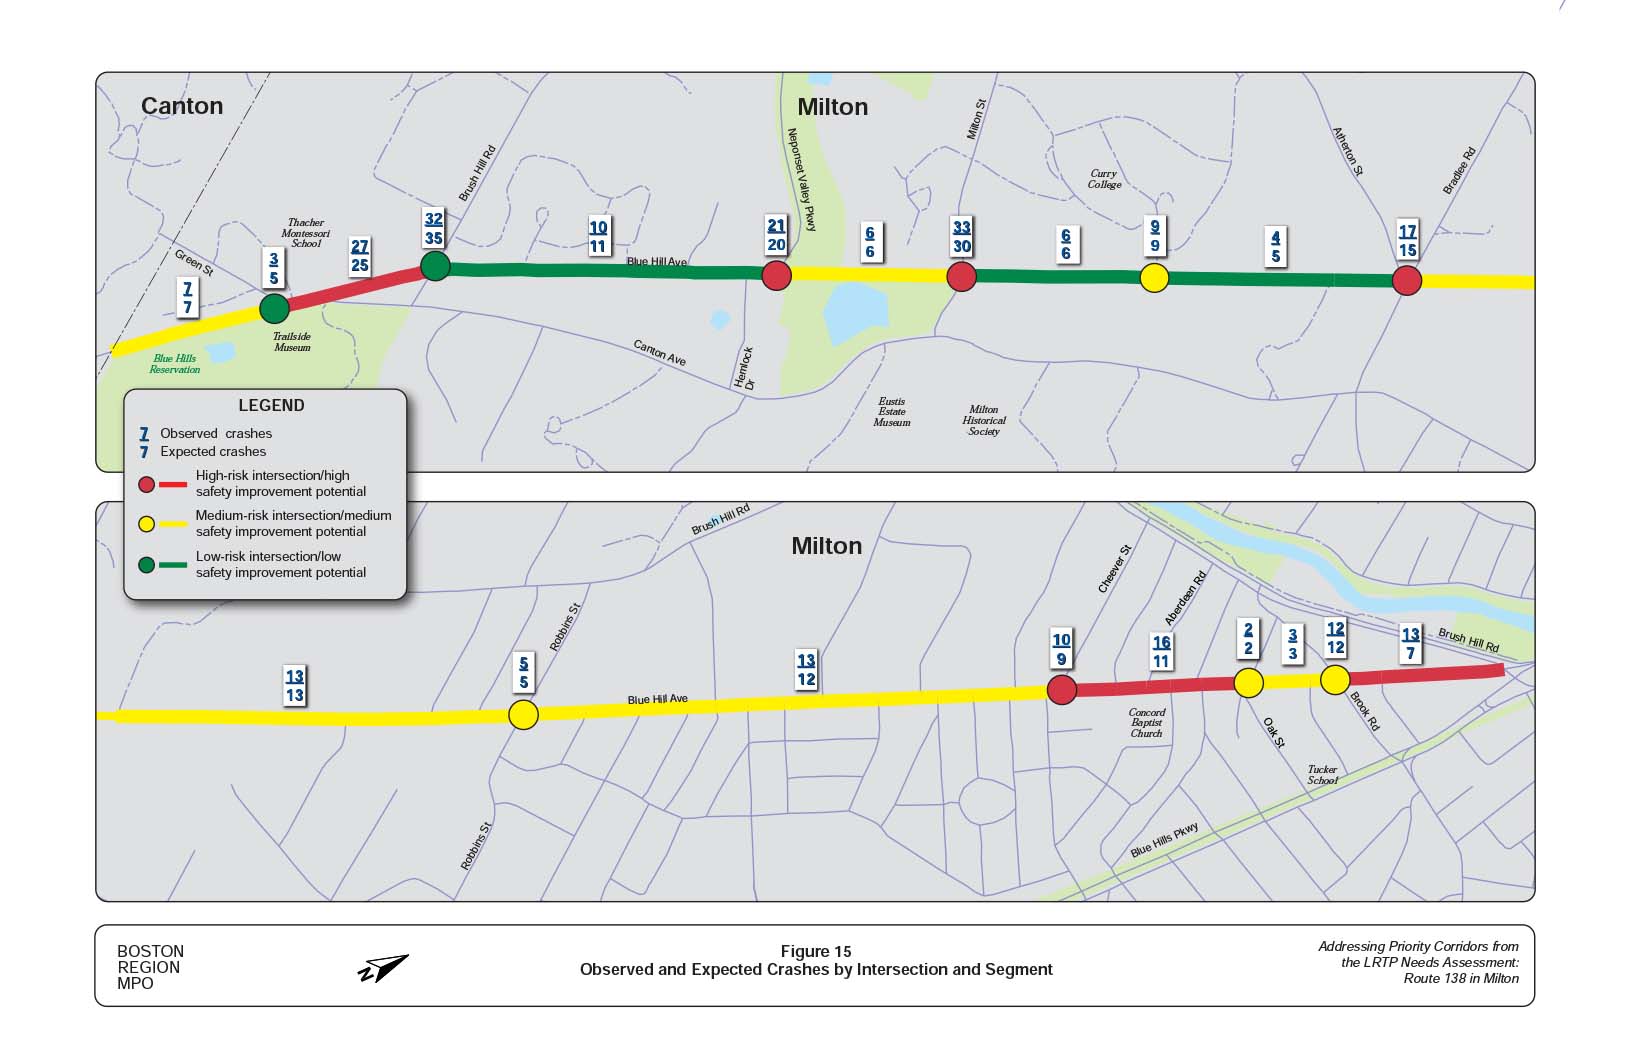 Figure 15 is a map of the study area showing observed and expected crashes by intersection and segment on Route 138 in Milton.